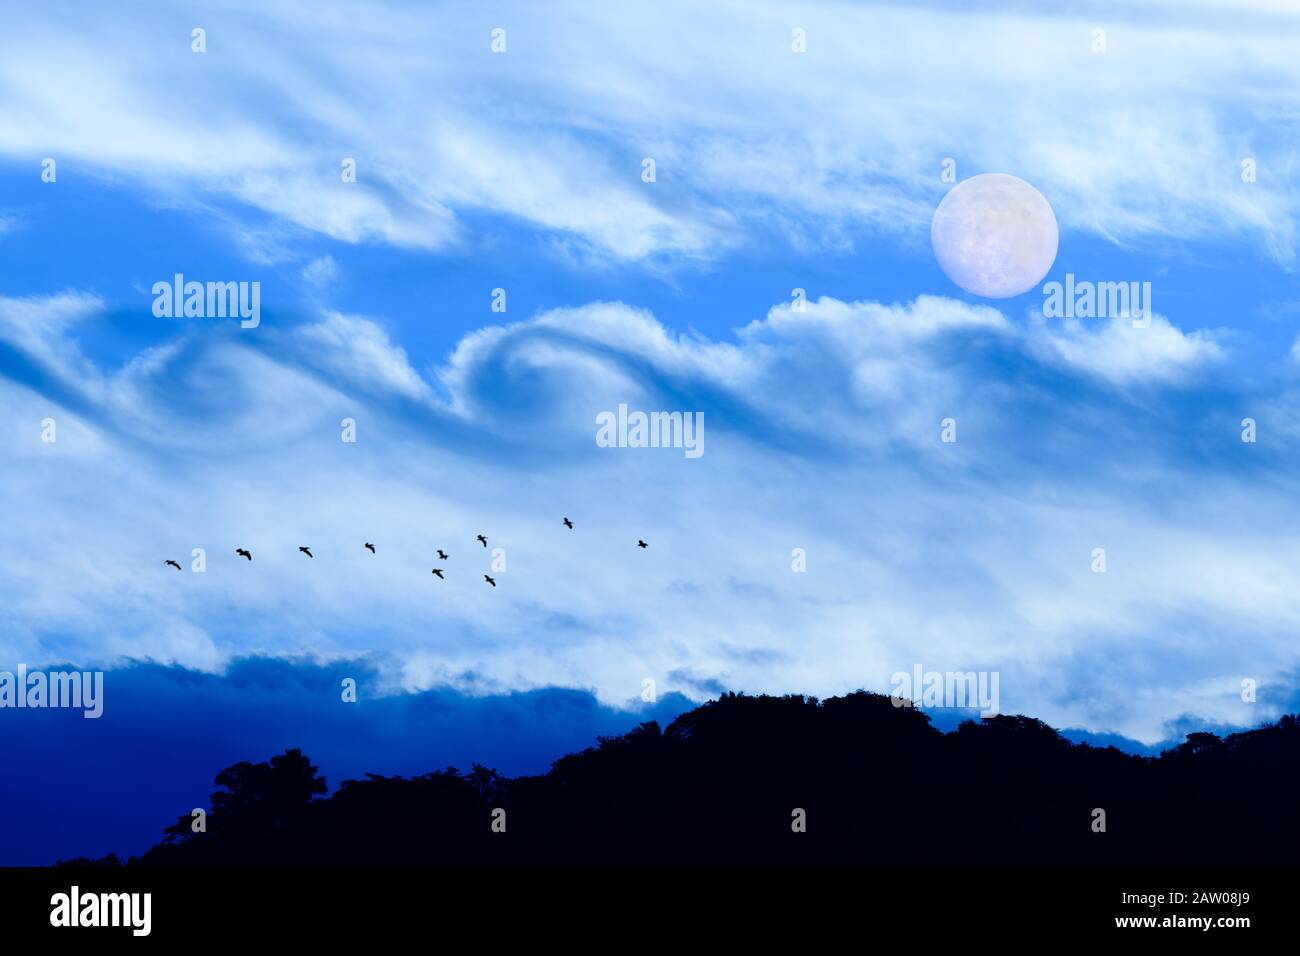 Full Moon Is Rising in the Night Sky While Birds are Silhouetted Against a Fantasy Like Cloudscape Stock Photo